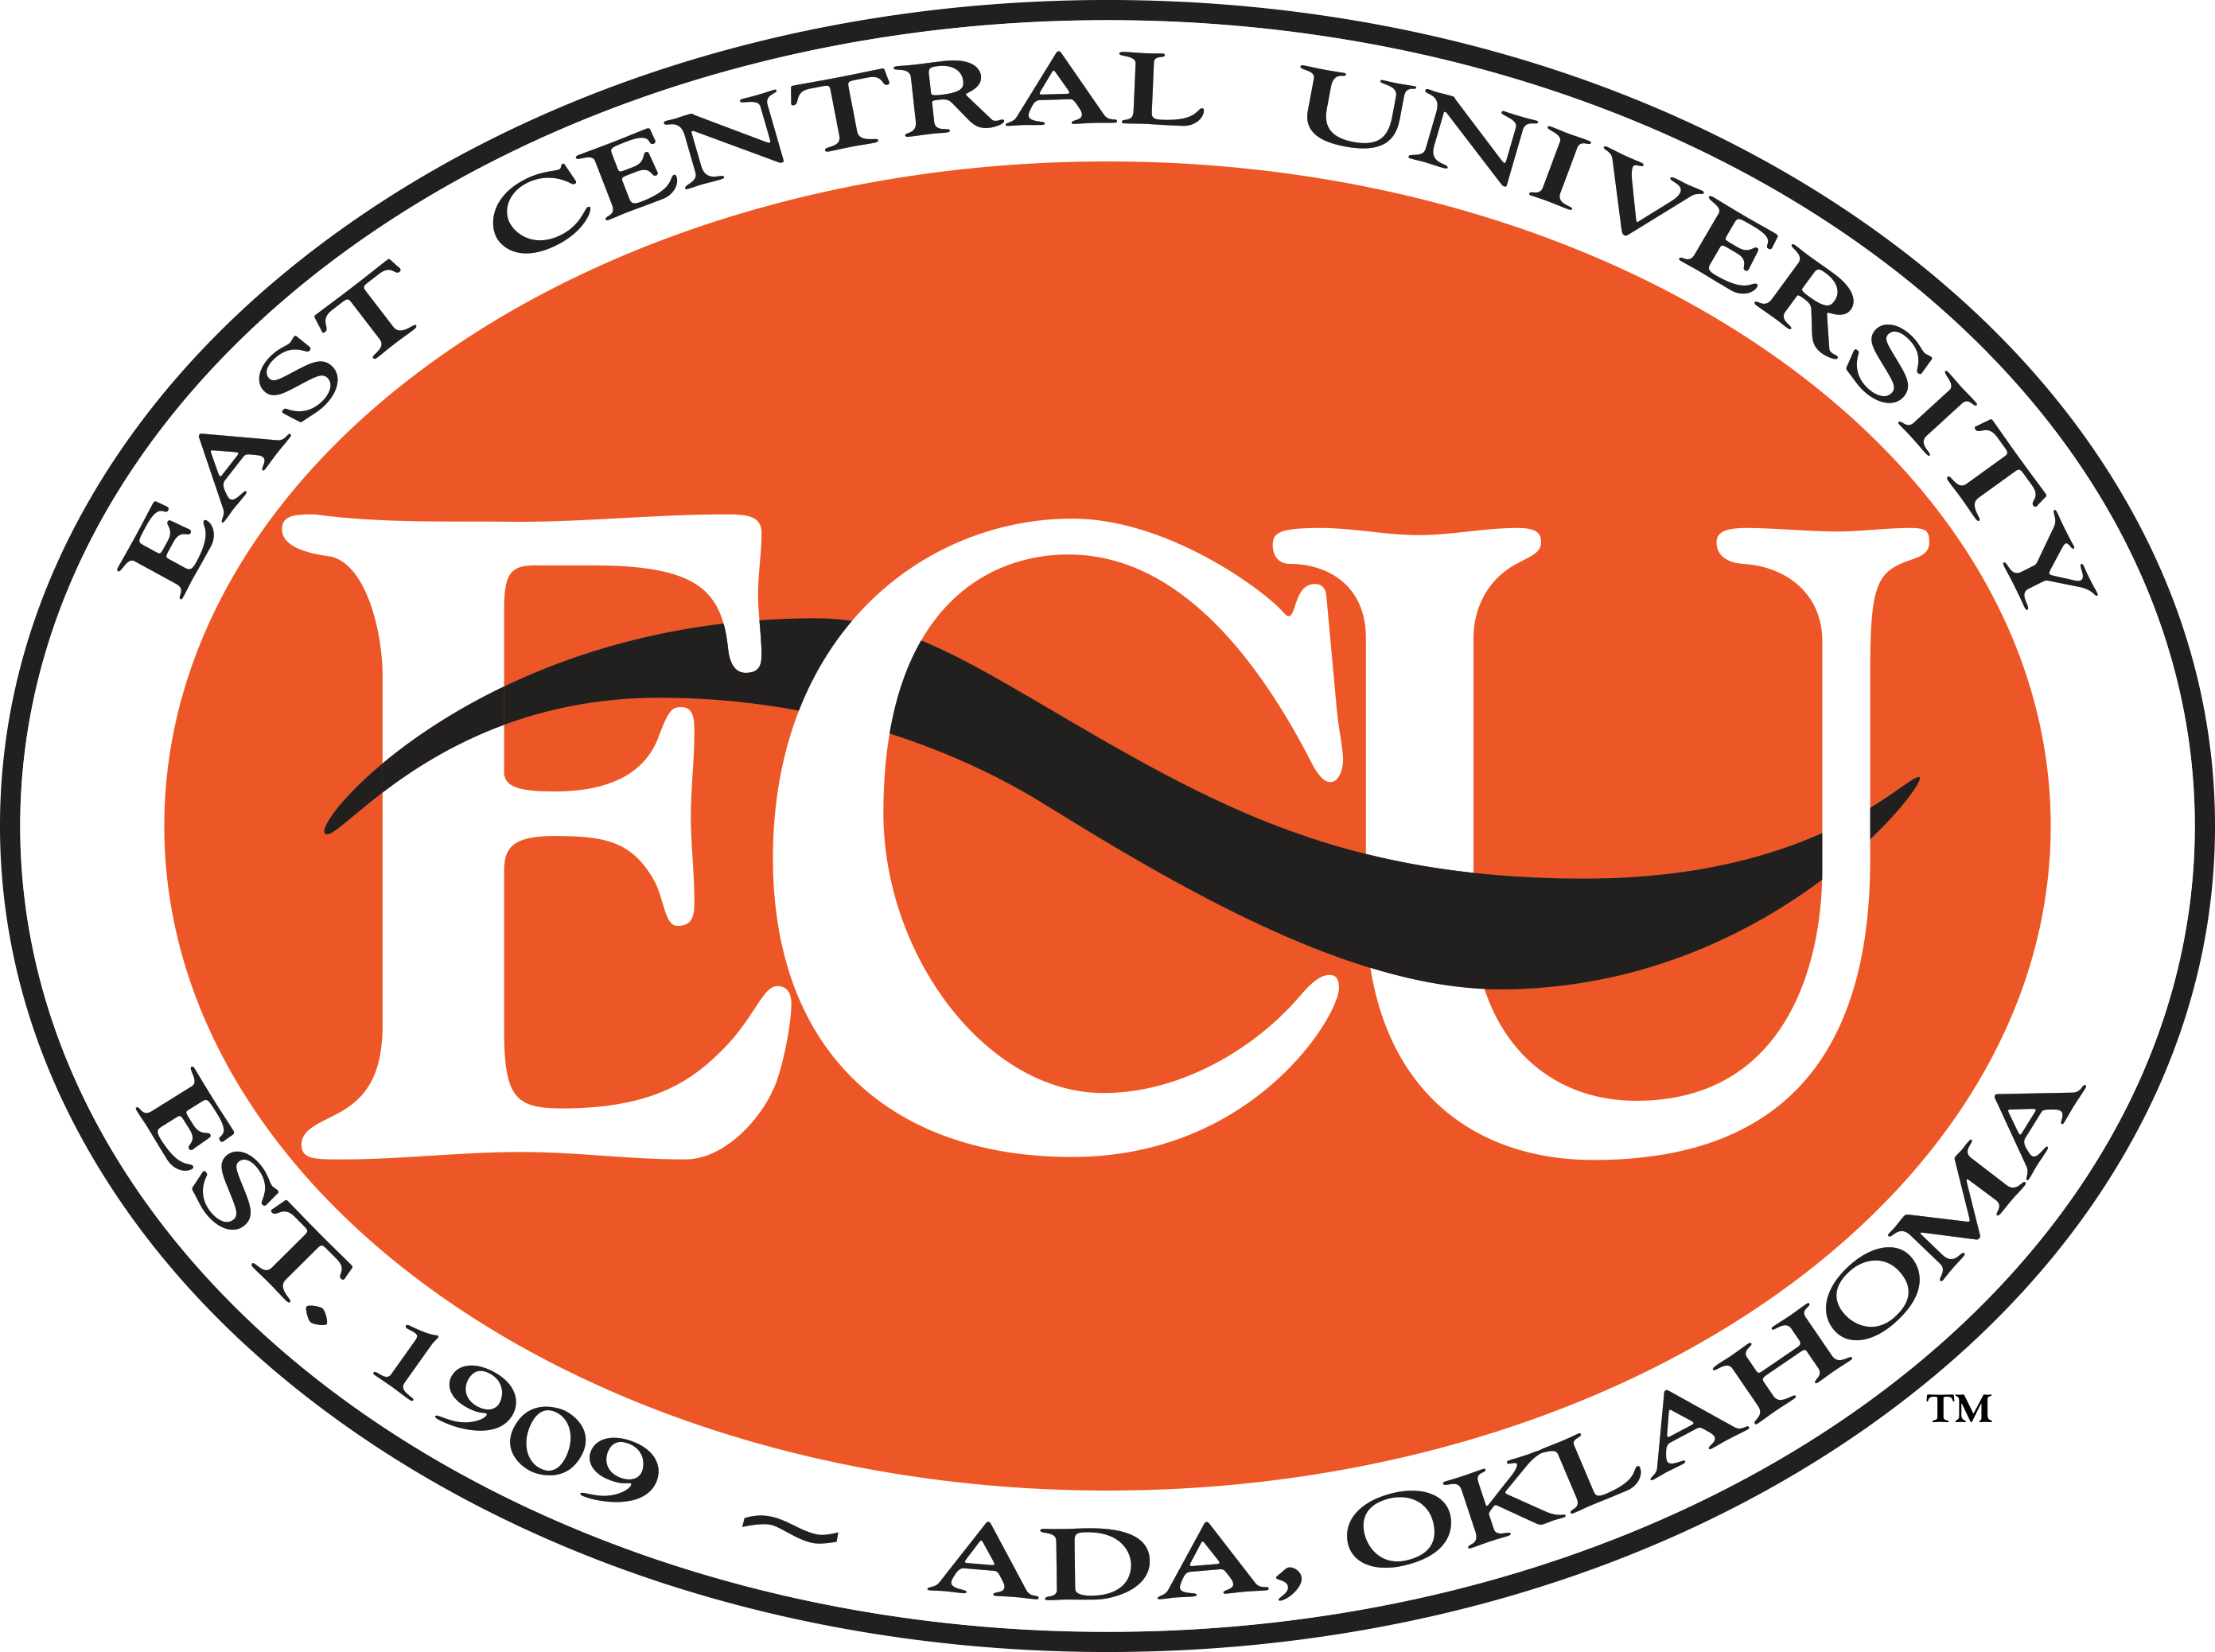 East Central University of Oklahoma